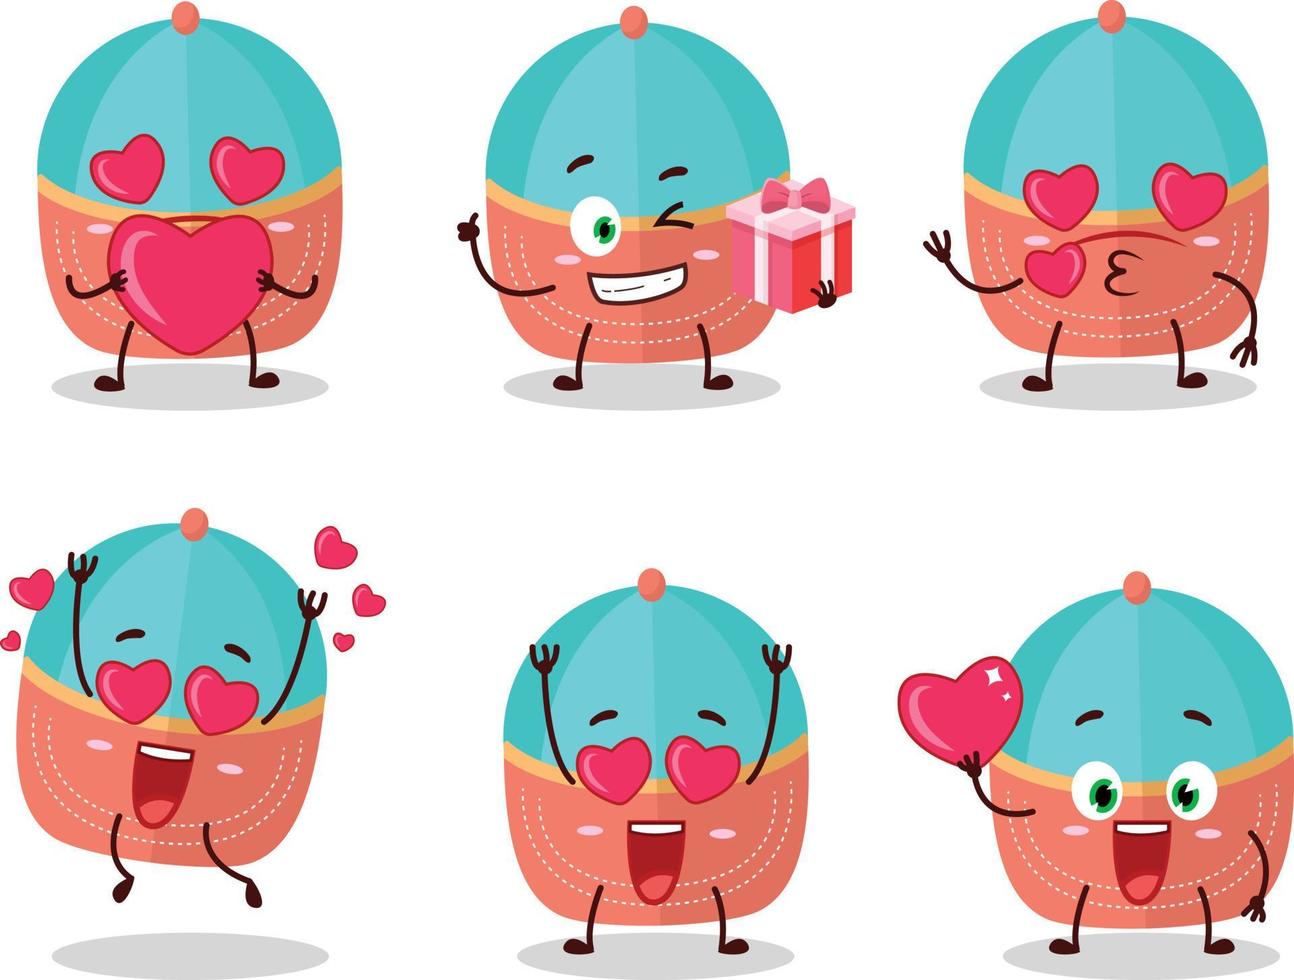 Hat cartoon character with love cute emoticon vector